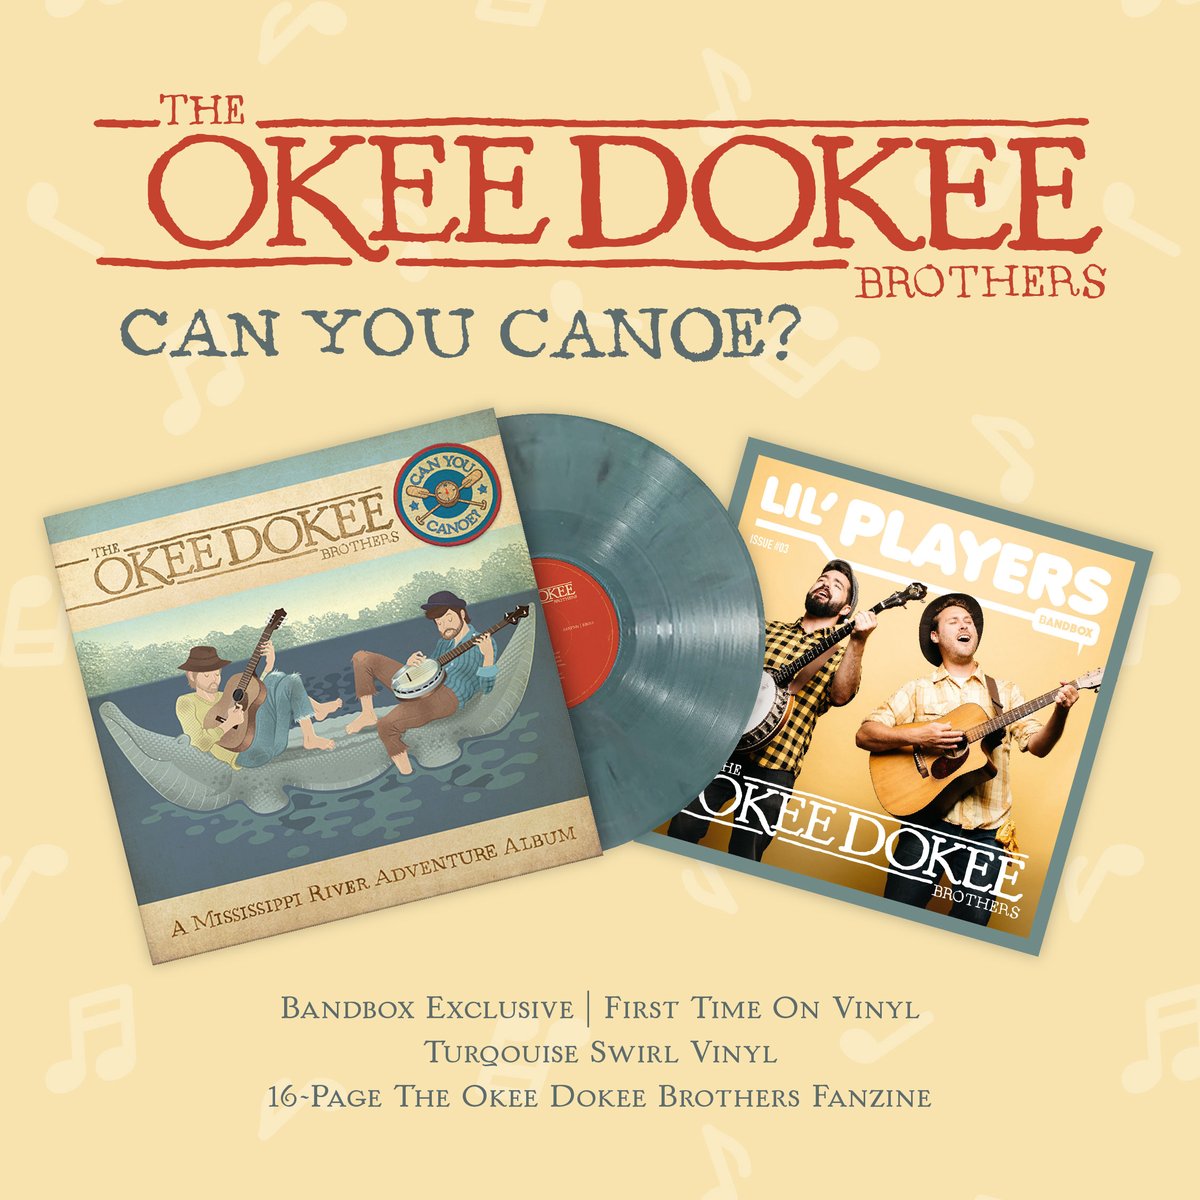 Some folks said it would never happen. But guess what?! It happened! We finally made Can You Canoe vinyls (thanks to BandBox)! You can now pre-order this vinyl record for your little audiophiles and it's estimated to ship by the end of September: bandboxrocks.com/collections/ex…